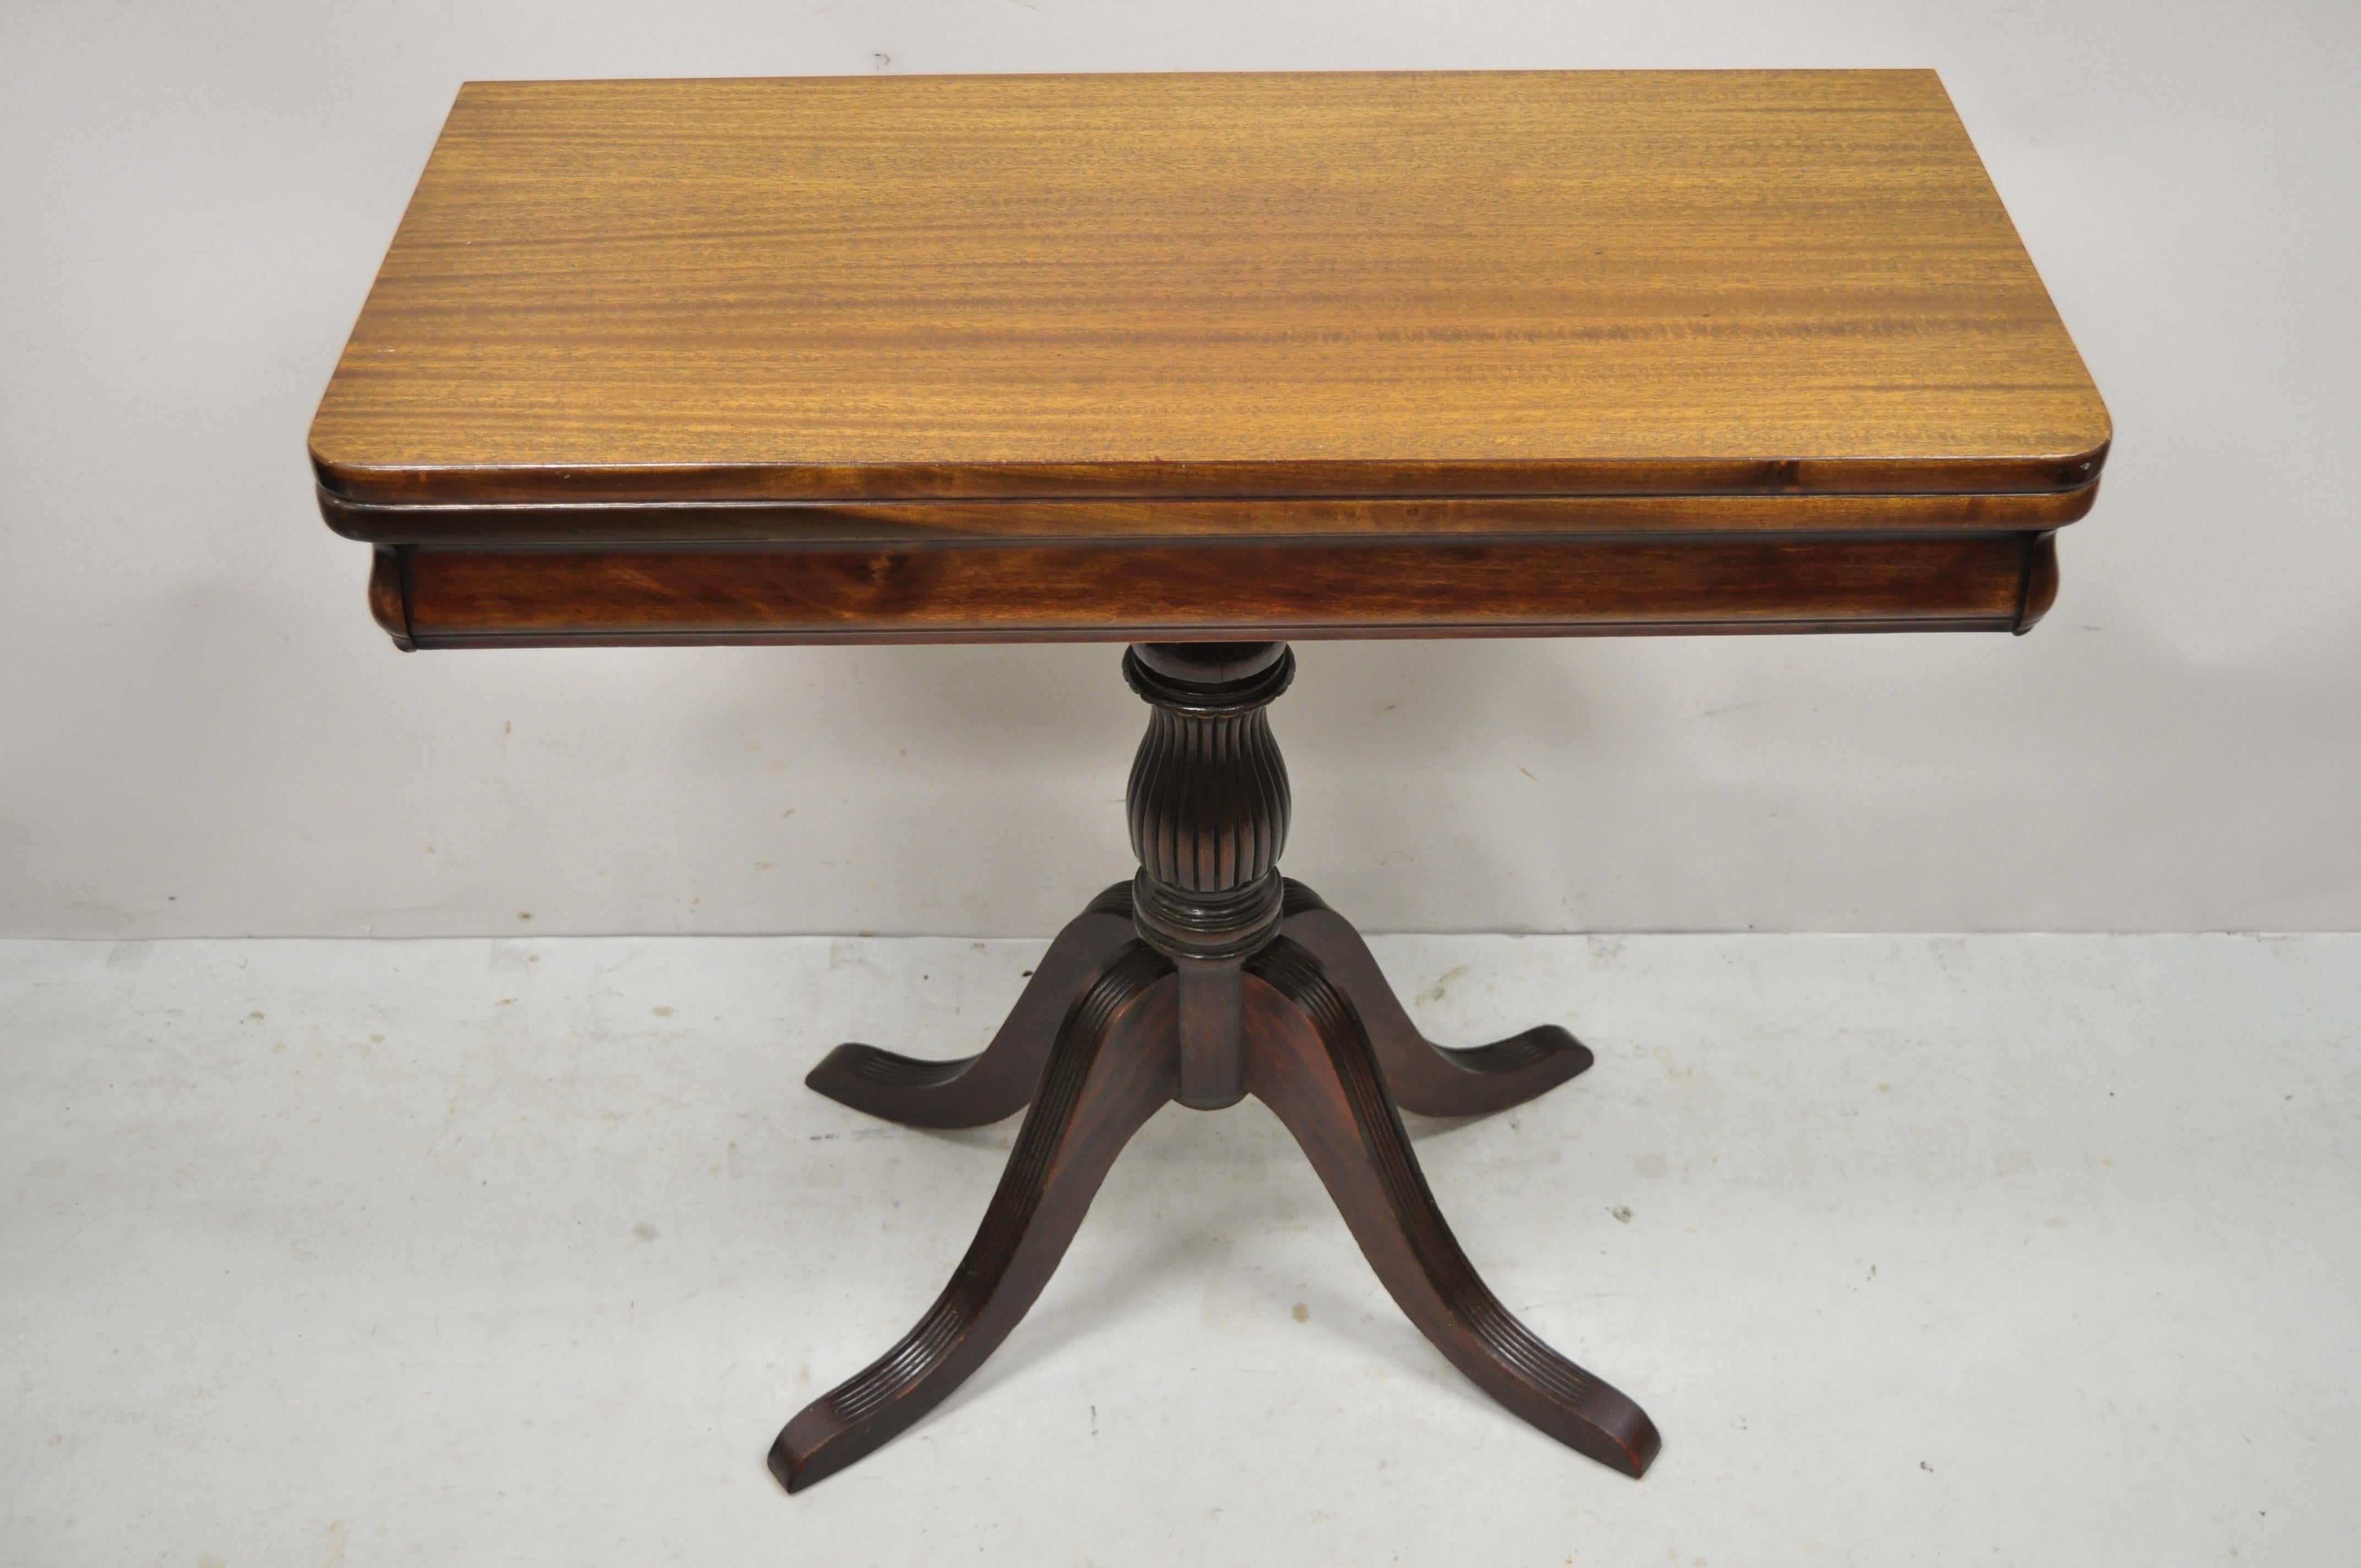 Red lion duncan Phyfe Pedestal base Mahogany flip top game console table. Item features flip top, beautiful wood grain, original stamp, very nice antique item, quality American craftsmanship, great style and form. Circa Early to Mid-20th century.